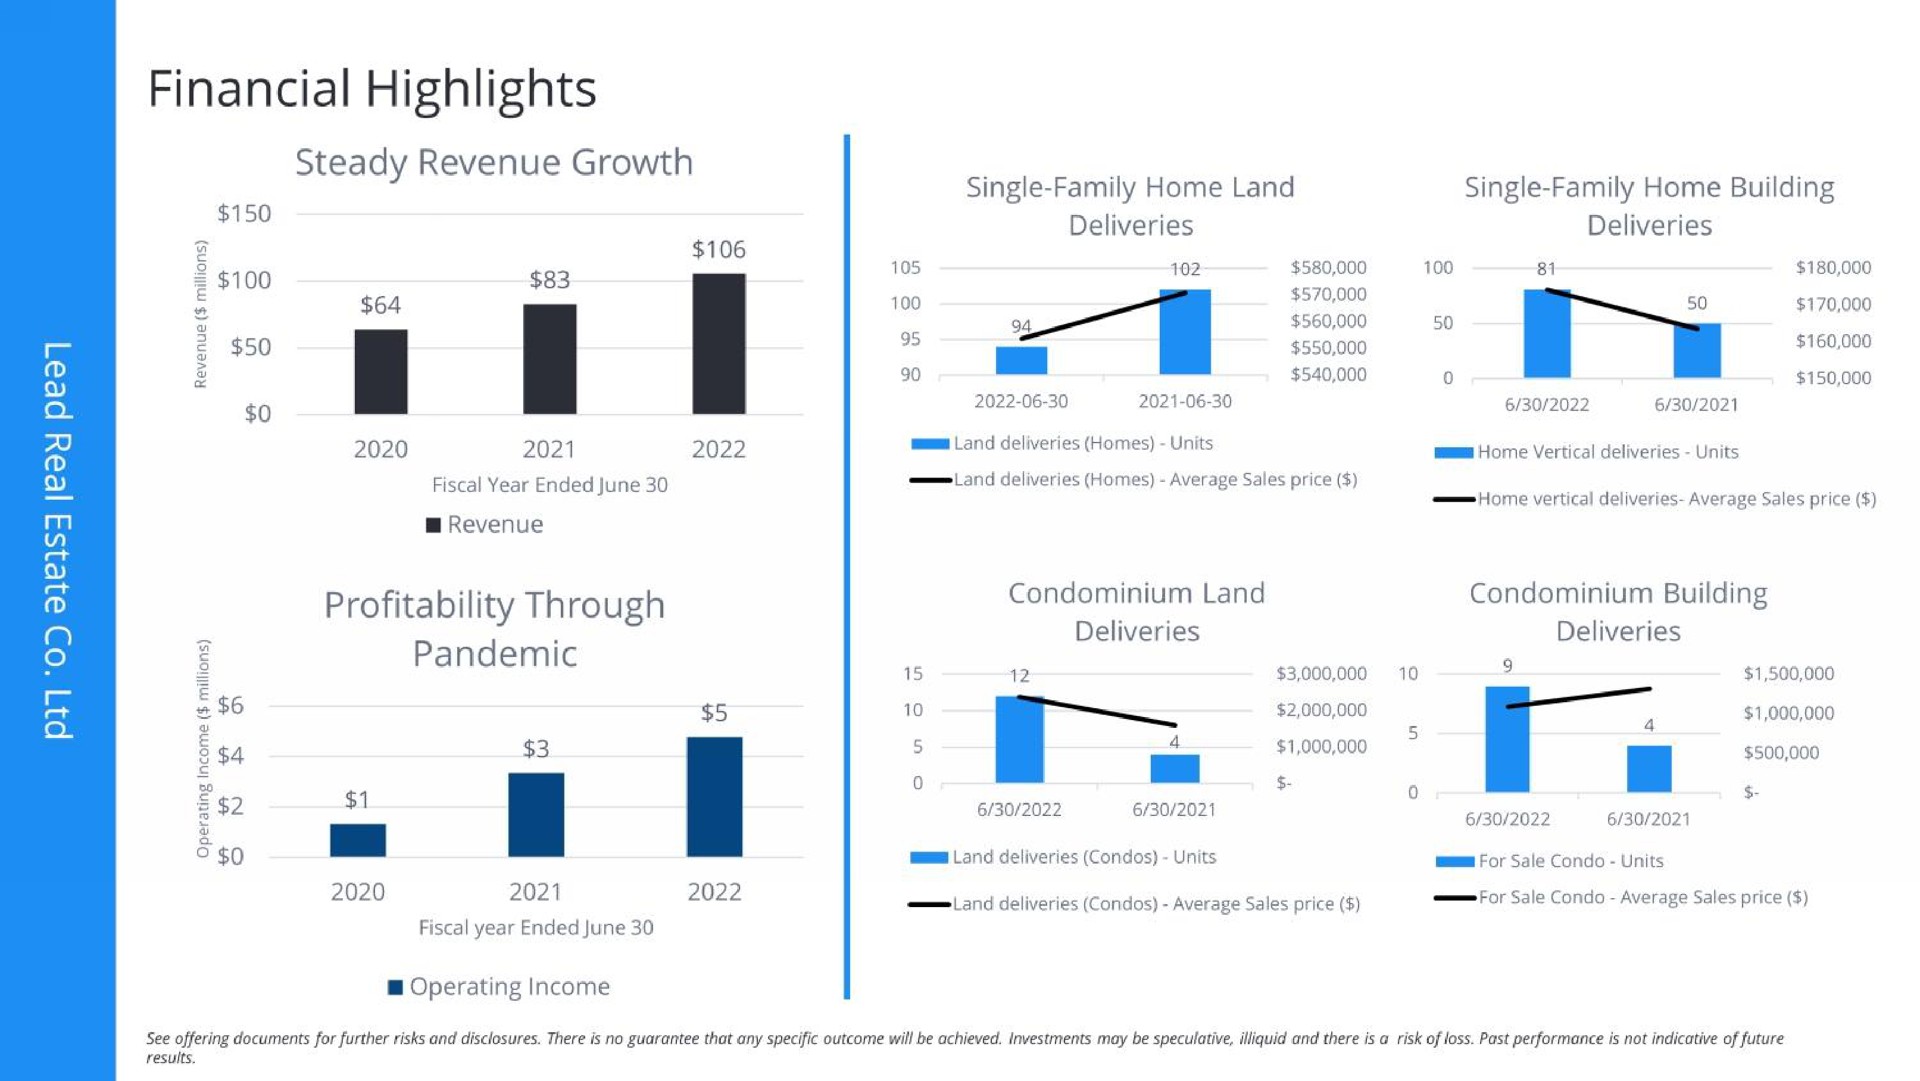 financial highlights steady revenue growth pandemic sas i | Lead Real Estate Co